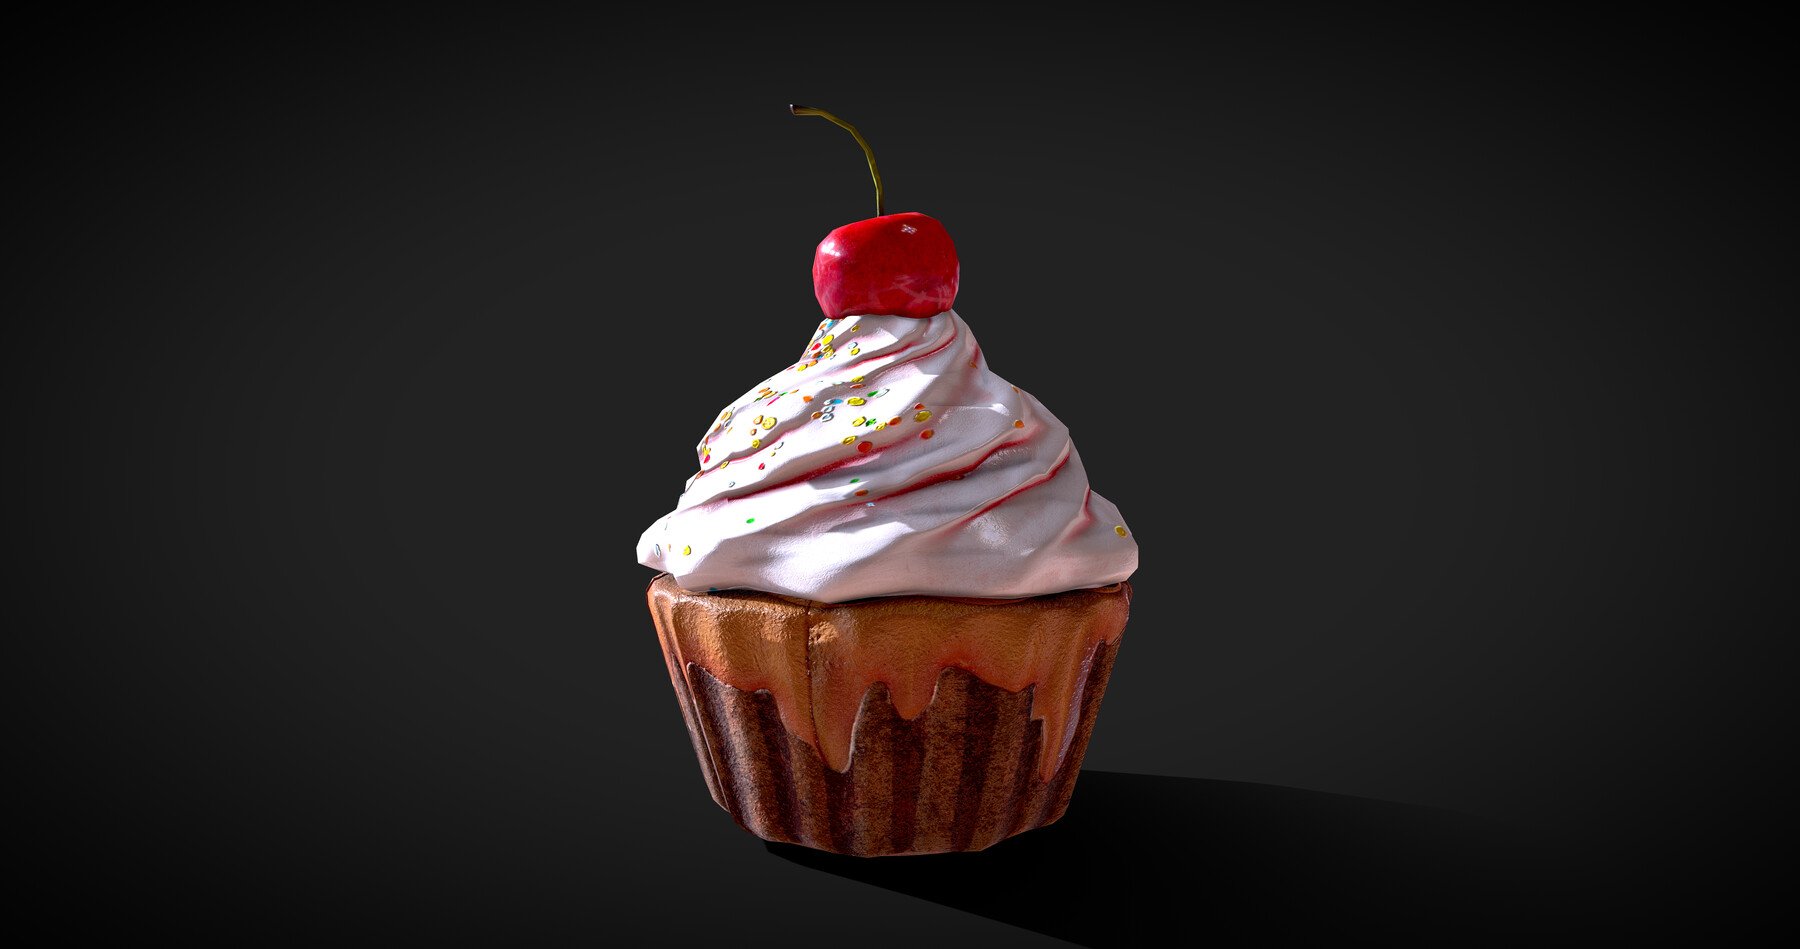 ArtStation - Cherry Cupcake - low poly 3D model | Game Assets